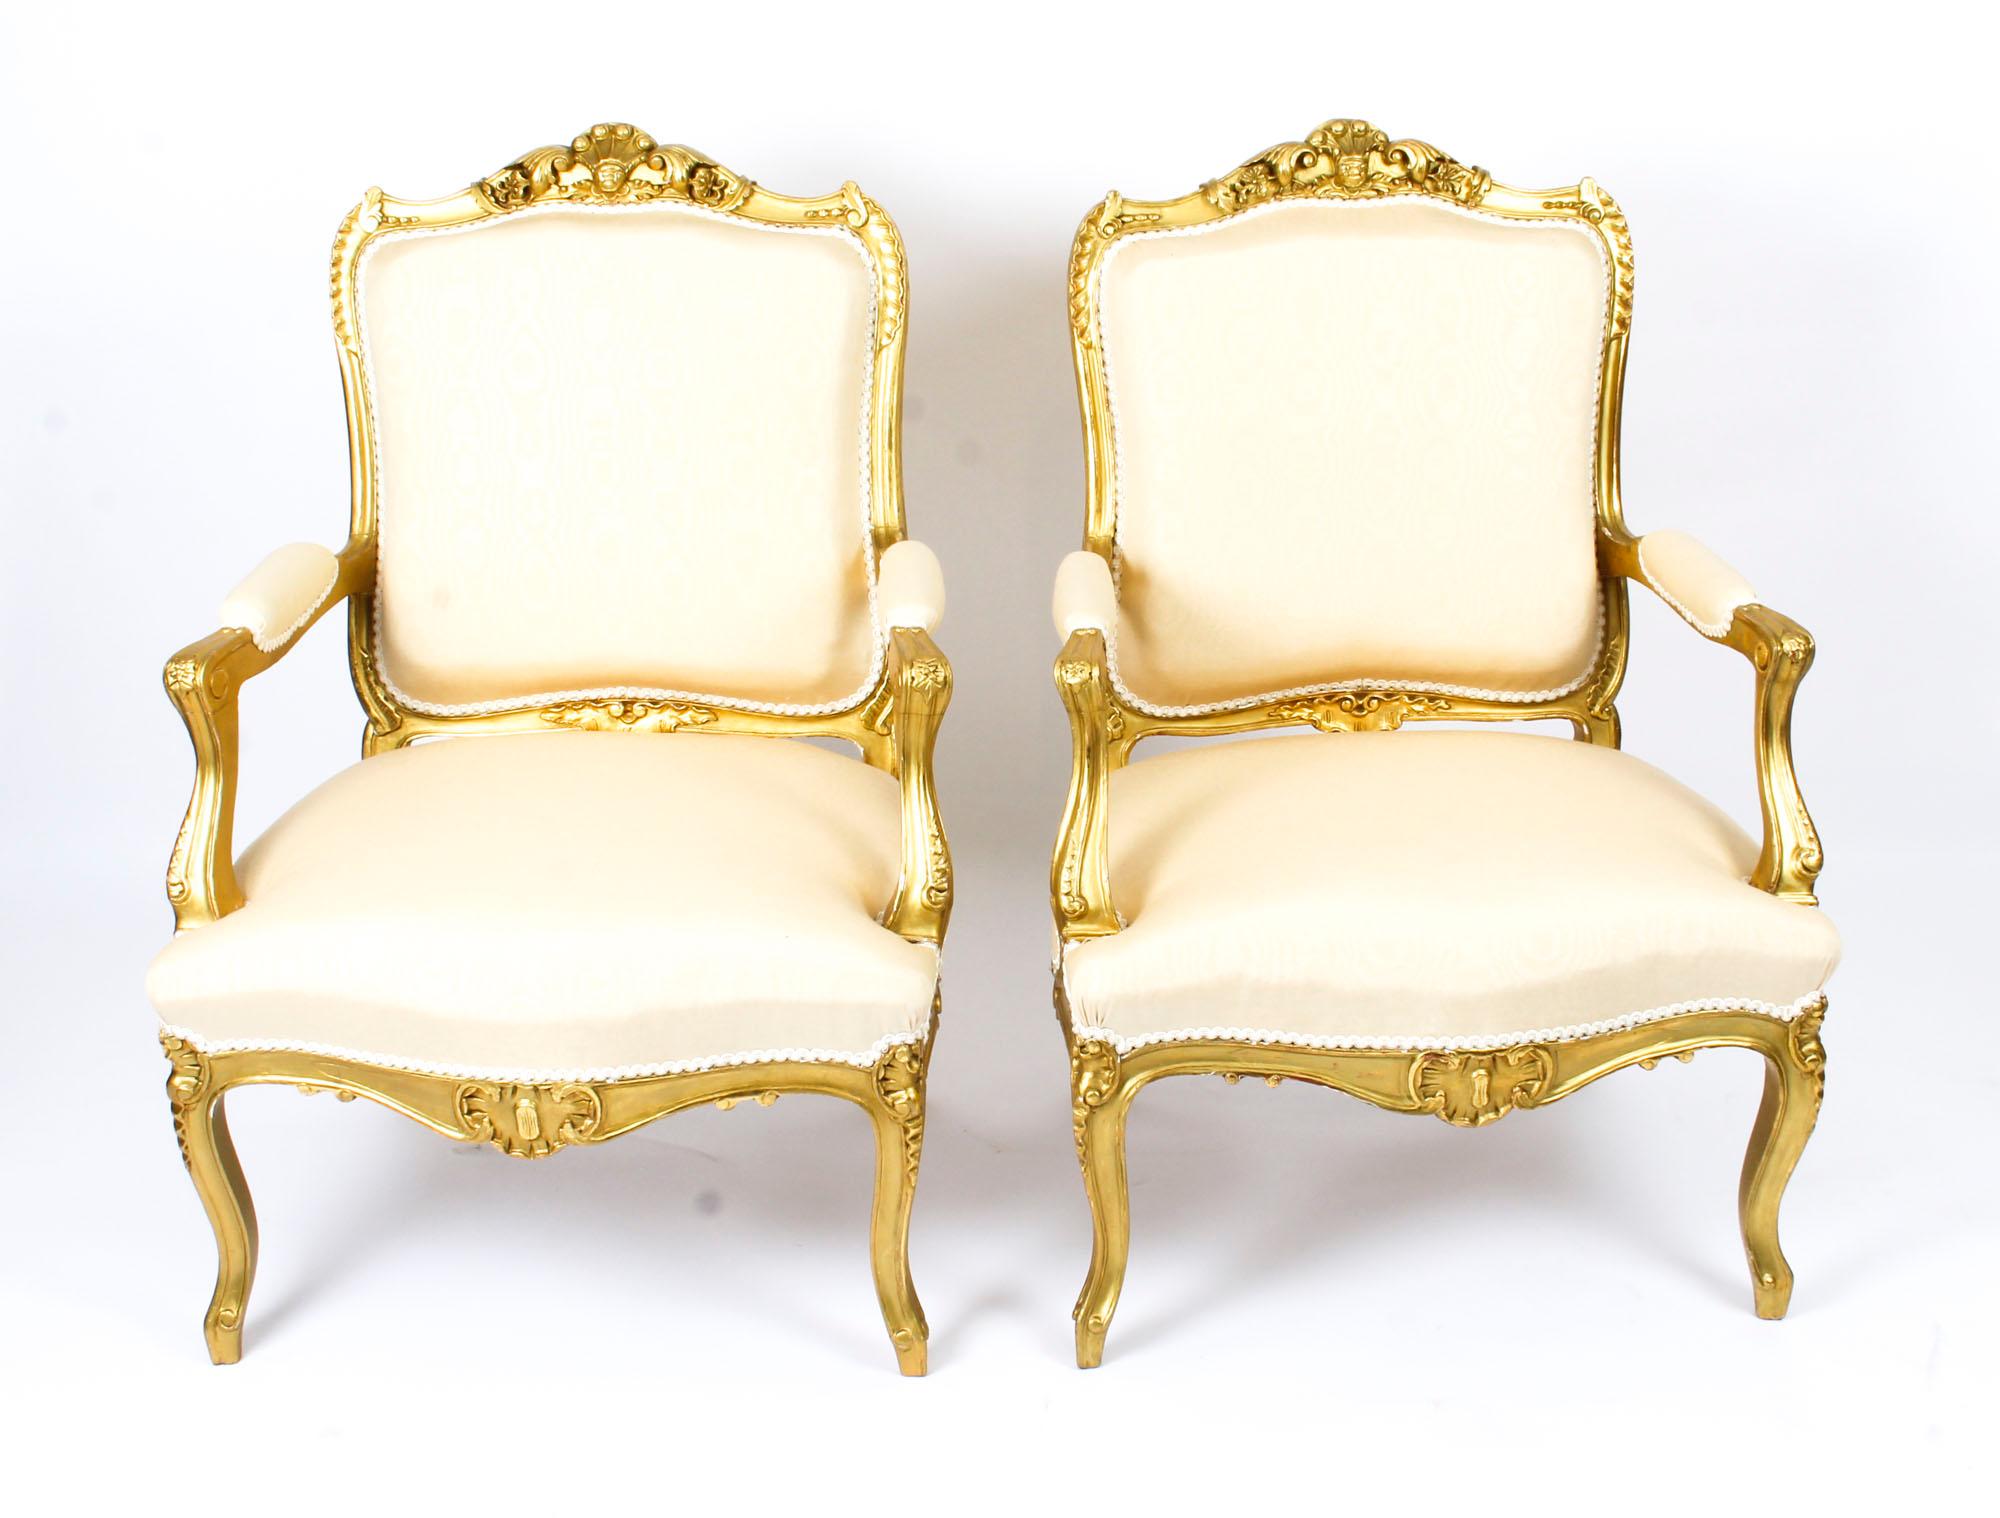 This is a stunning antique French giltwood Louis Revival four piece salon suite comprising a pair of armchairs and a pair of side chairs, circa 1860 in date.
 
They have been expertly carved and gilded, decorated with acanthus, florals, scrolls and